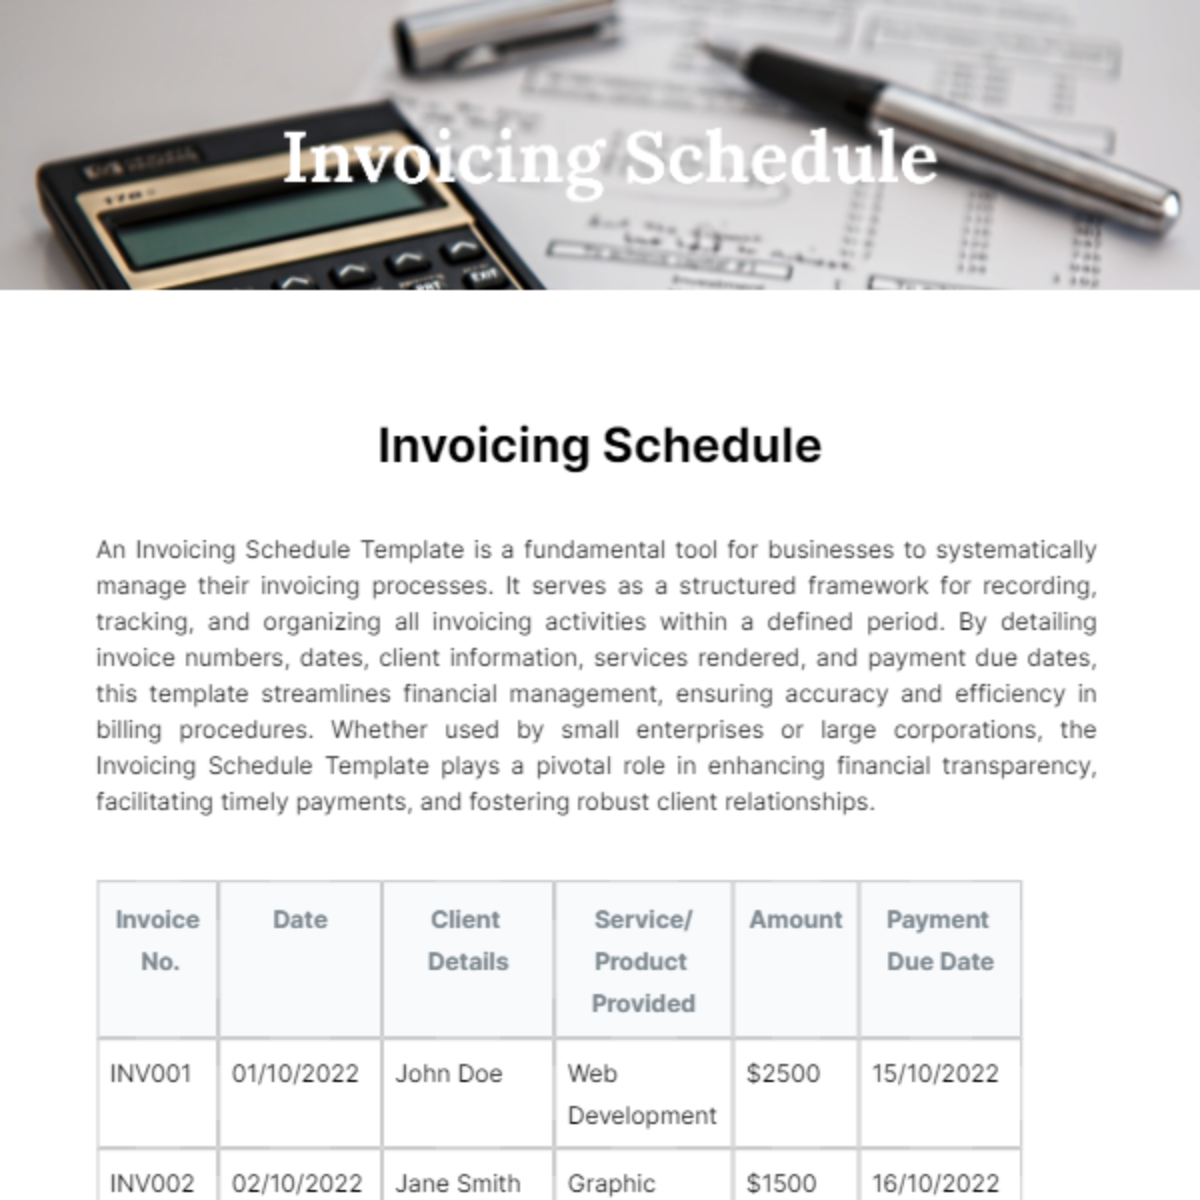 Invoicing Schedule Template